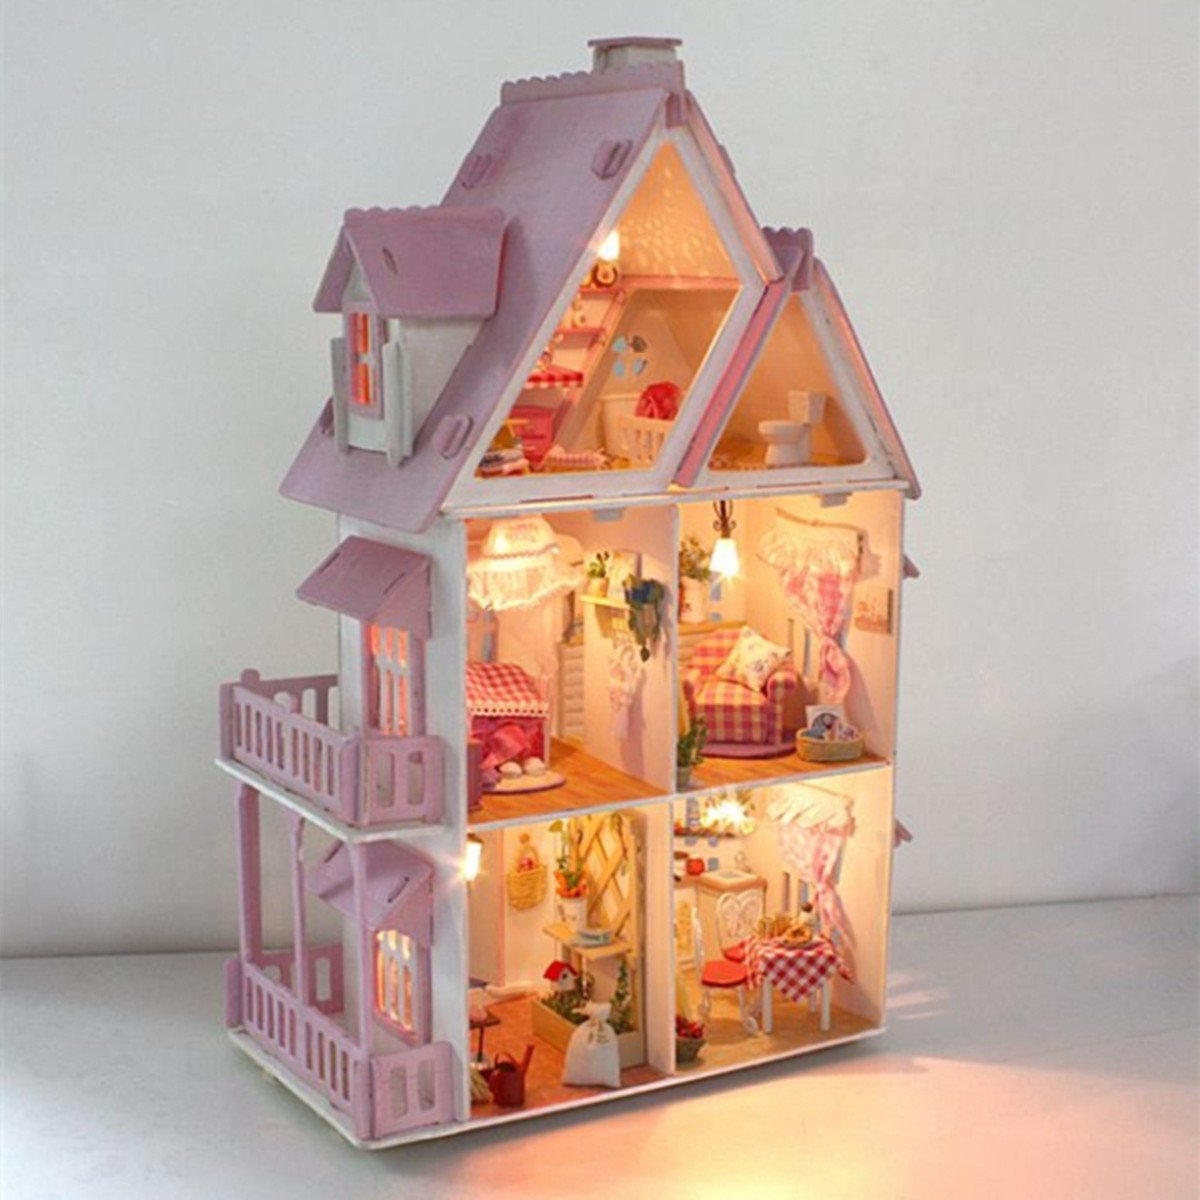 Assembling DIY Miniature Model Kit Wooden Doll House, Unique Big Size House Toy With Furnitures For Kids & Lover